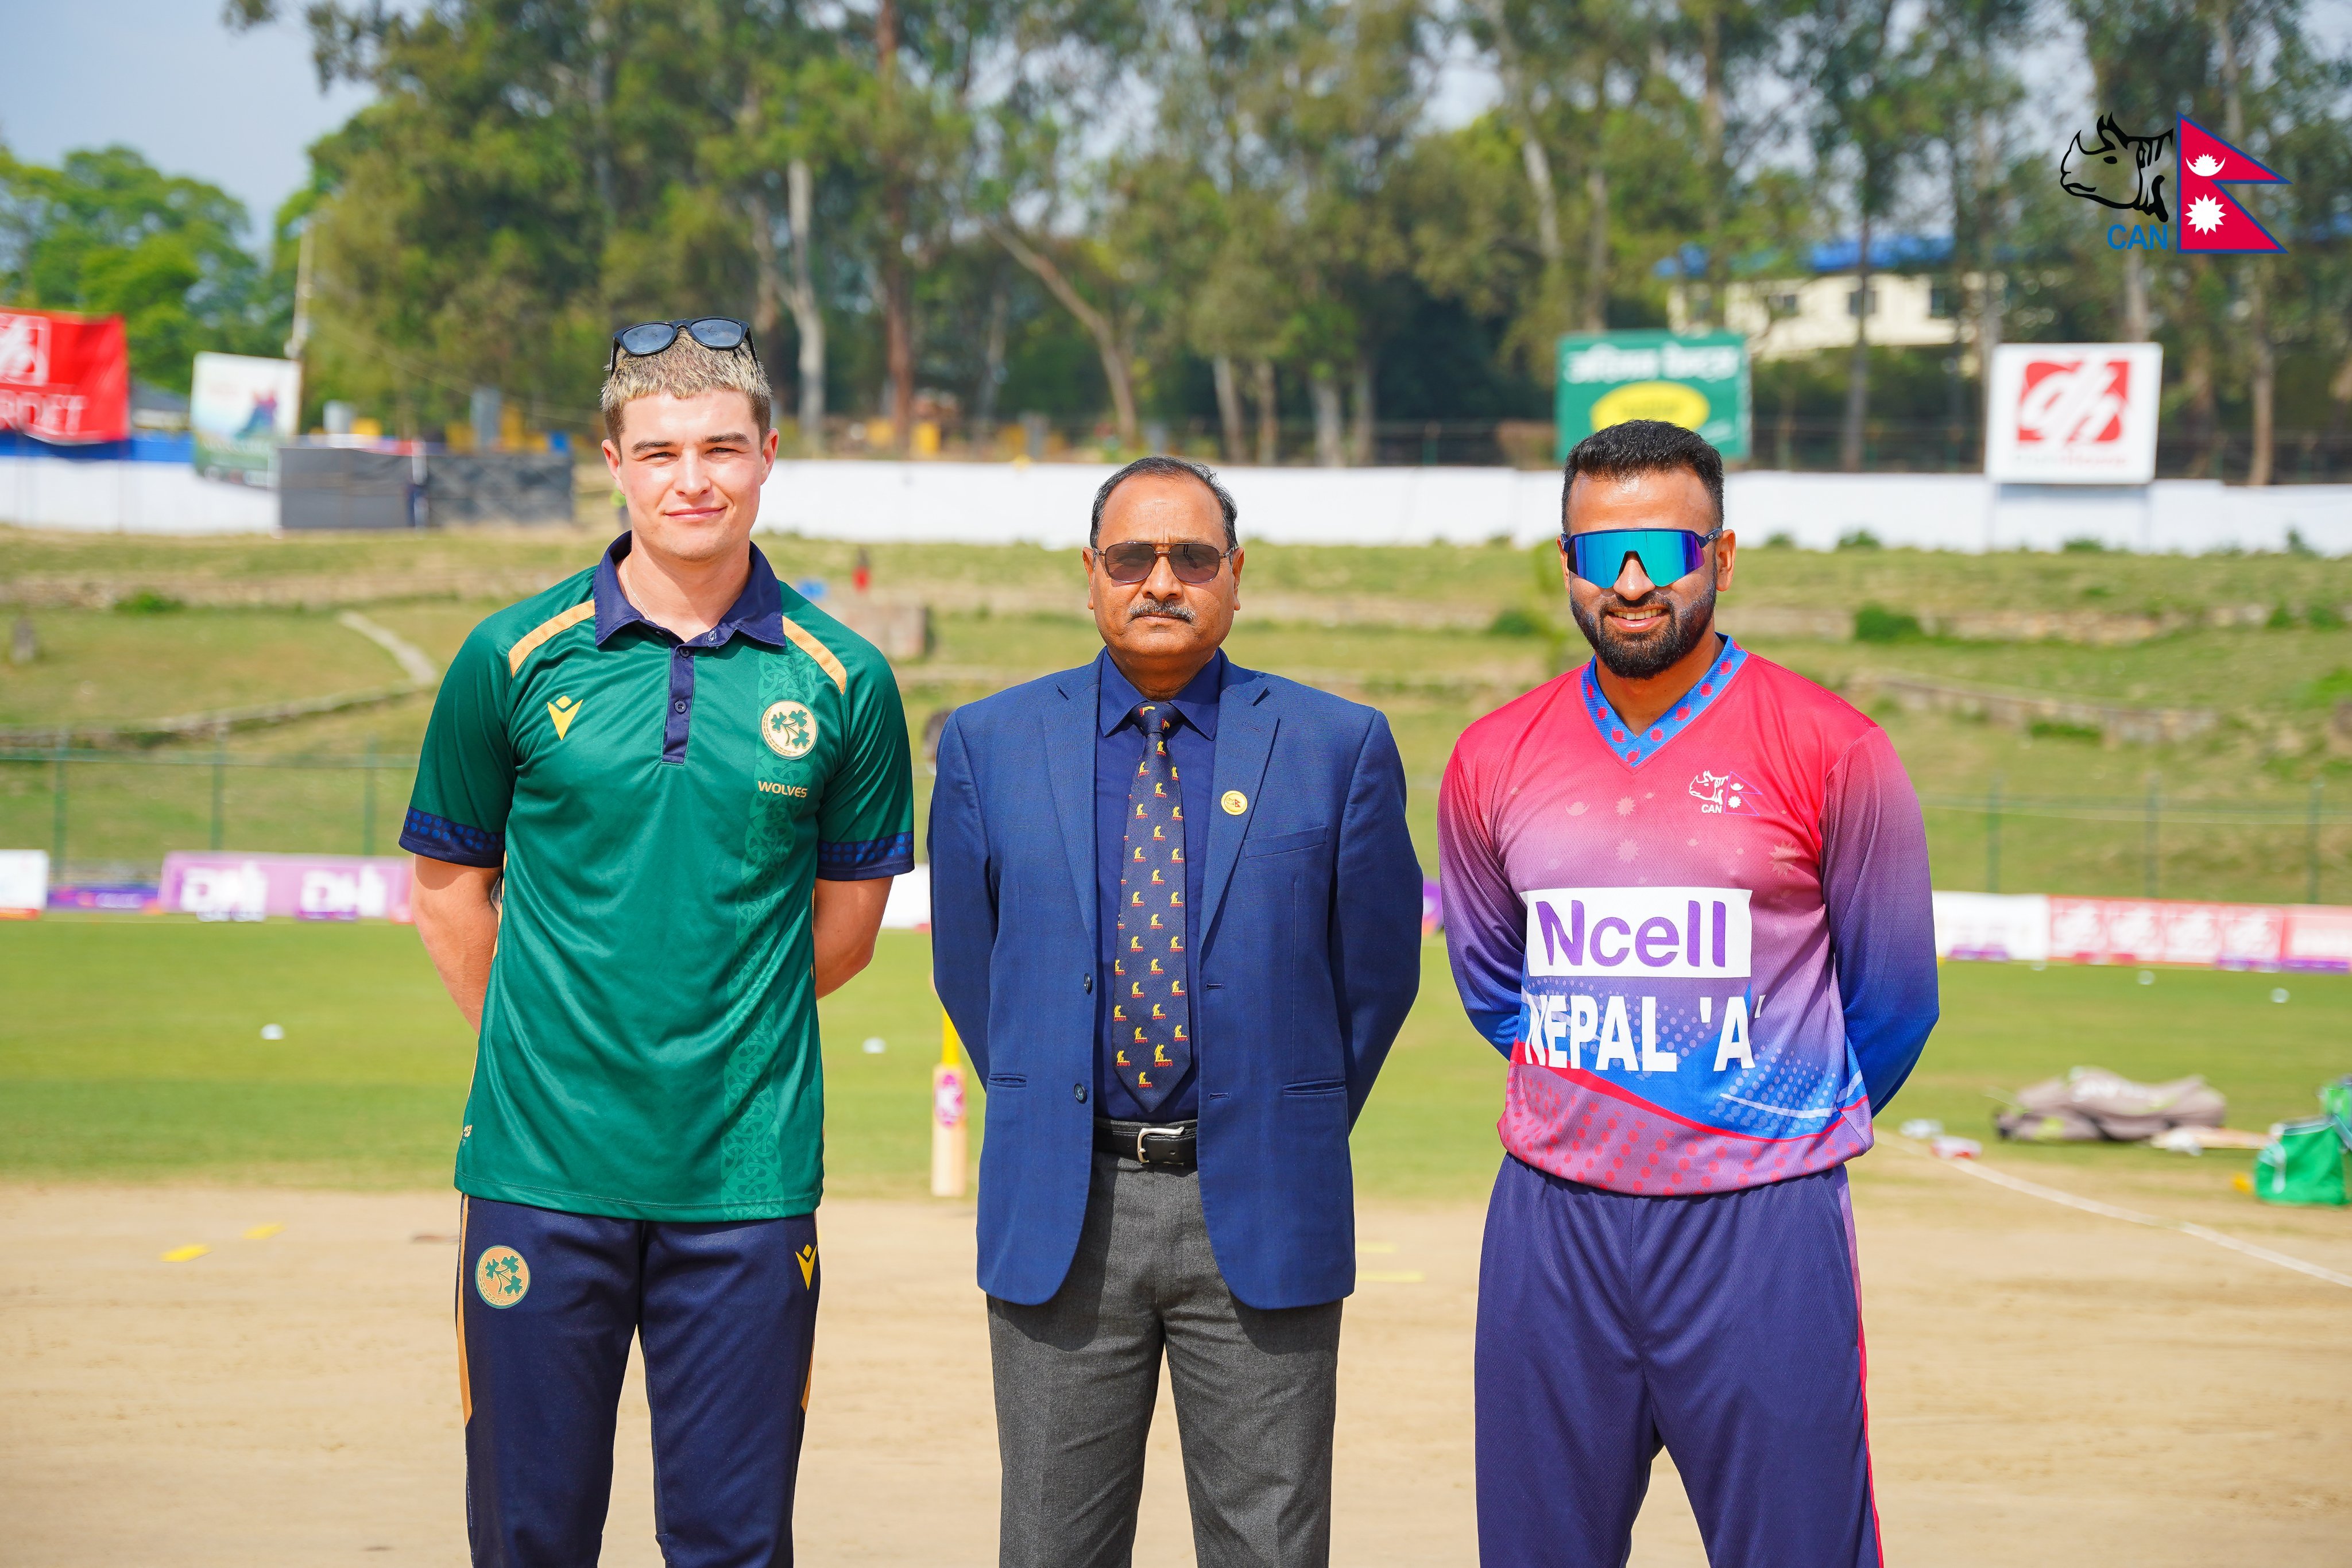 Nepal 'A' to field first against Ireland Wolves